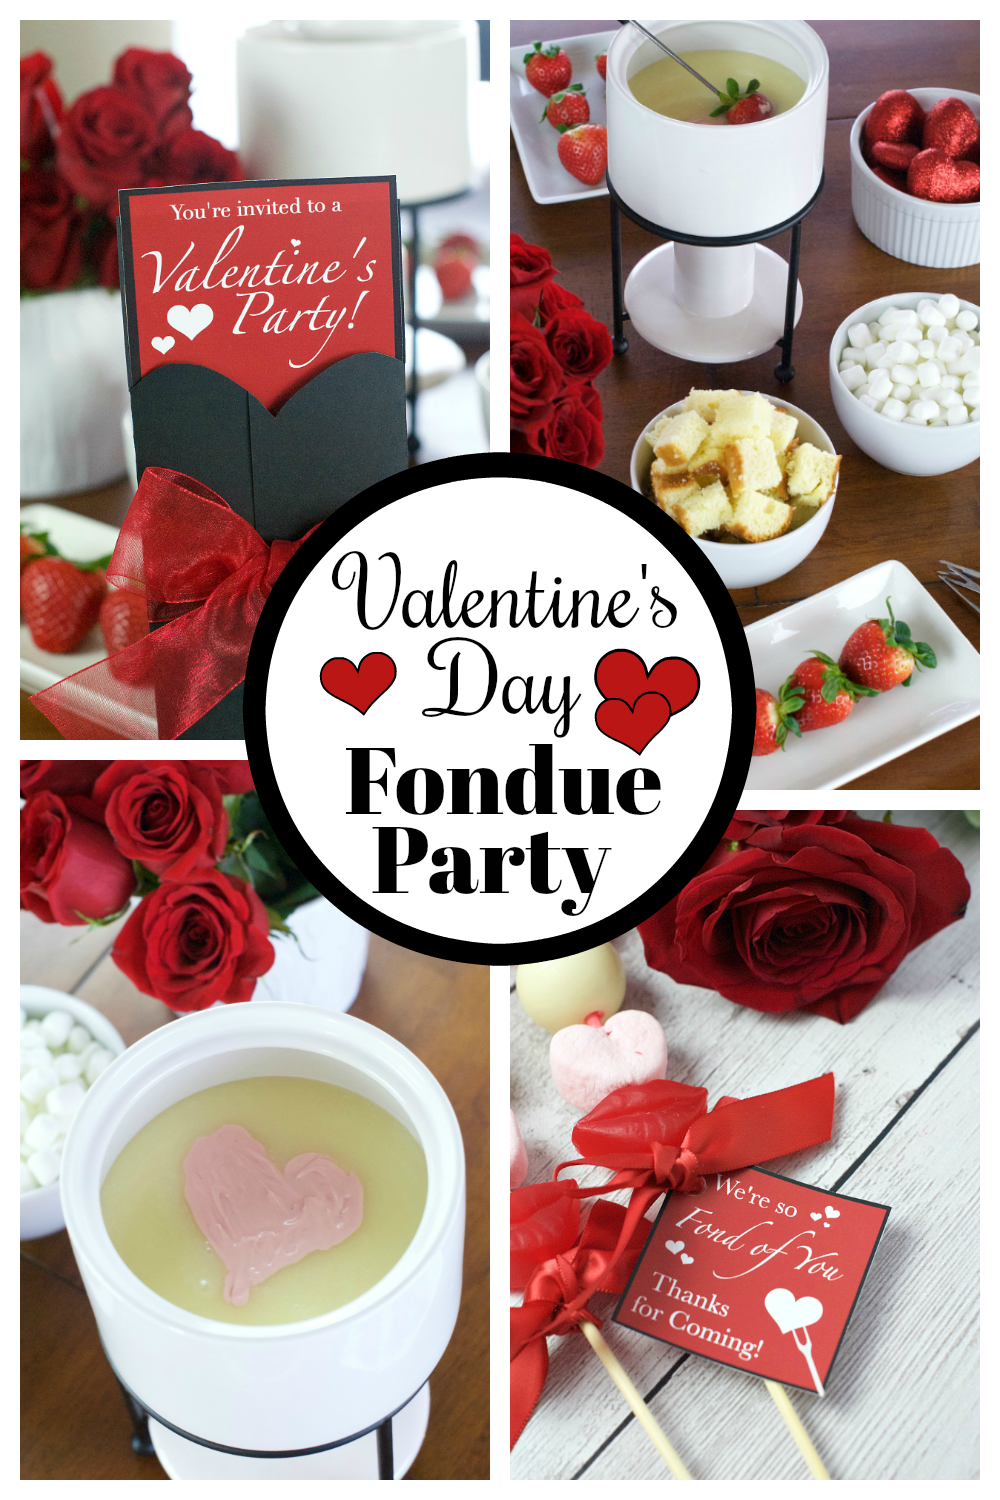 Fun Valentine's Day Party Ideas. We have everything you need for the perfect Valentine's party. Invitations, a fondue recipe, and party favors. Fun and simple, perfect for your next Valentine's Day. #Valentinesdayparty #Valentinespartyideas #fondueparty #Valentinesdaypartyforcouples